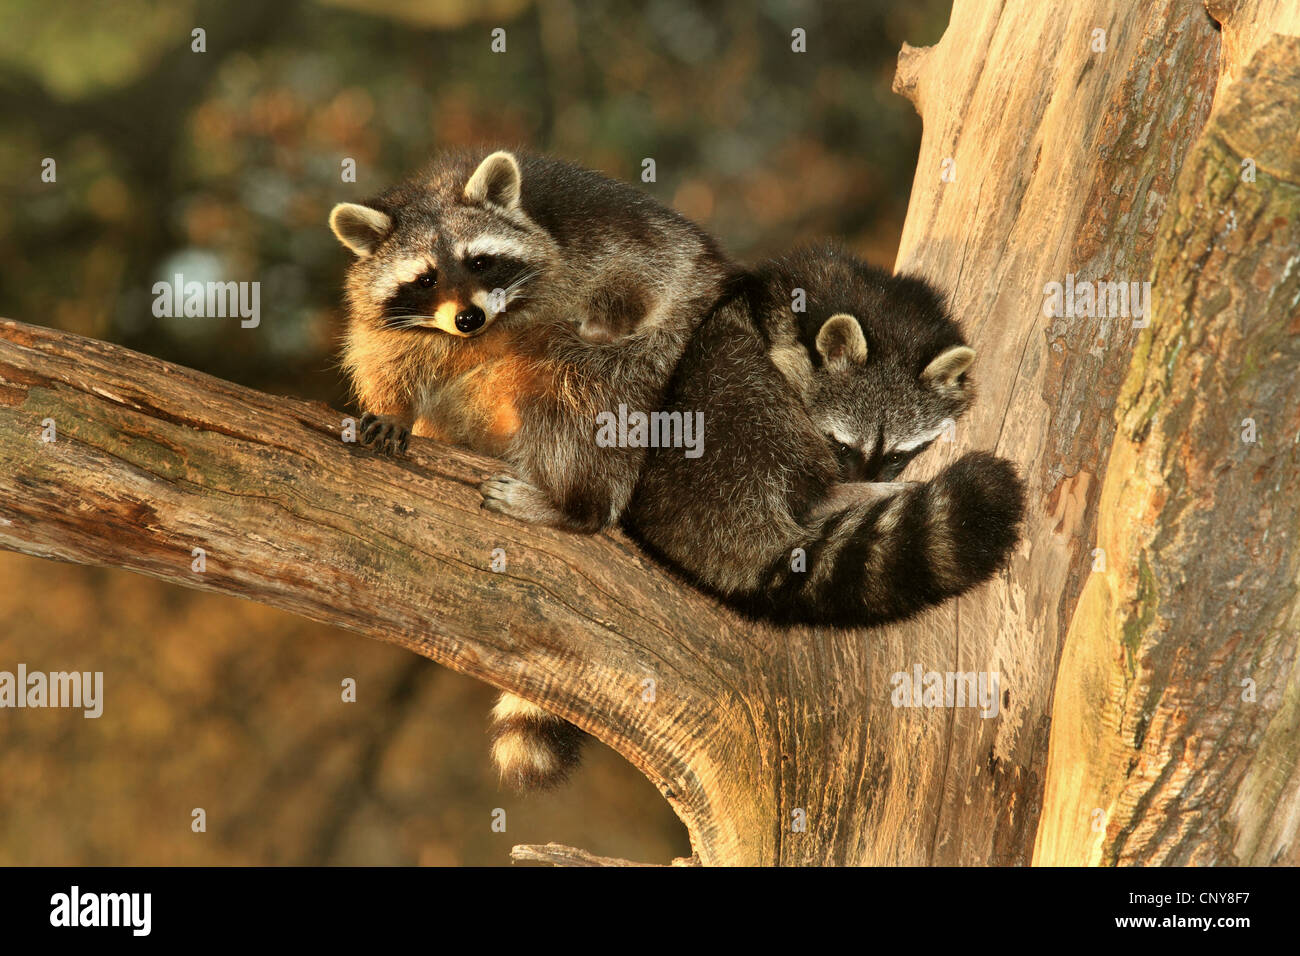 common raccoon (Procyon lotor), two raccoons on a tree resting, Germany Stock Photo